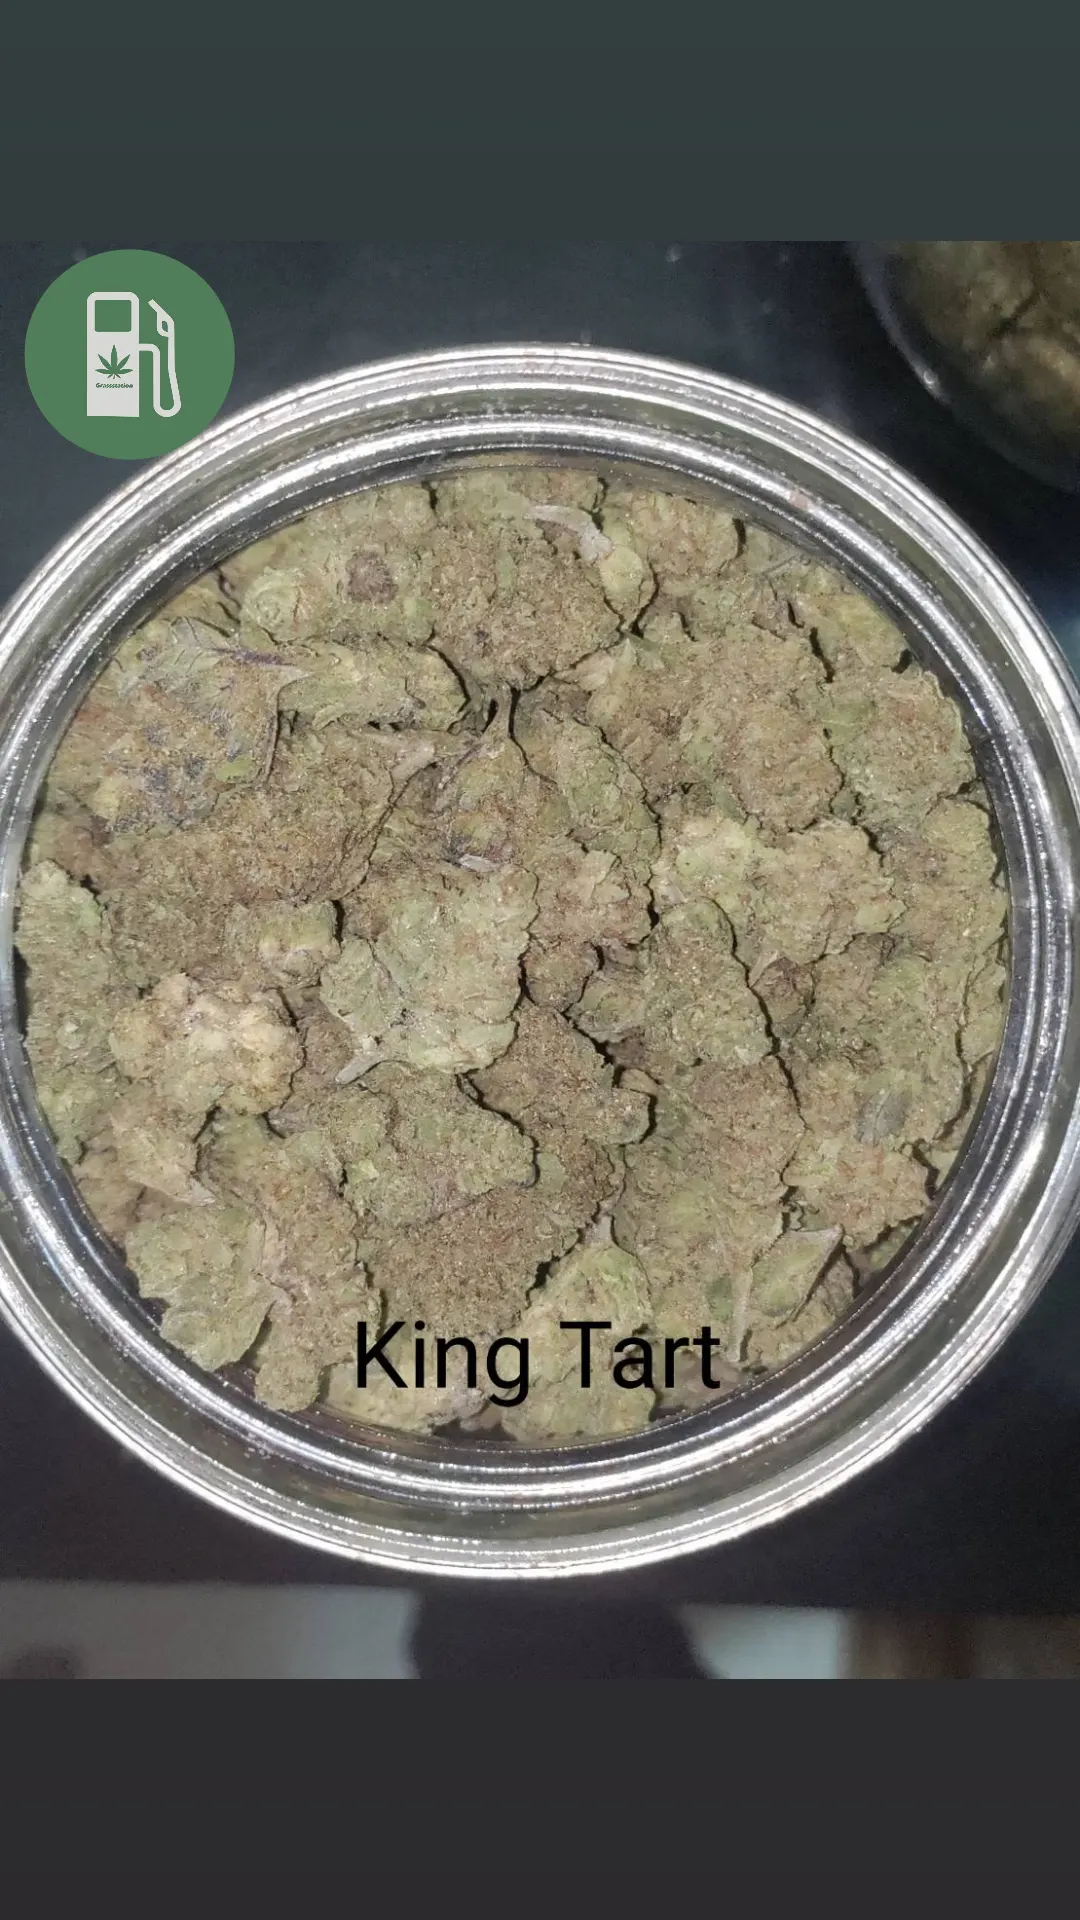 Product Image for King Tart